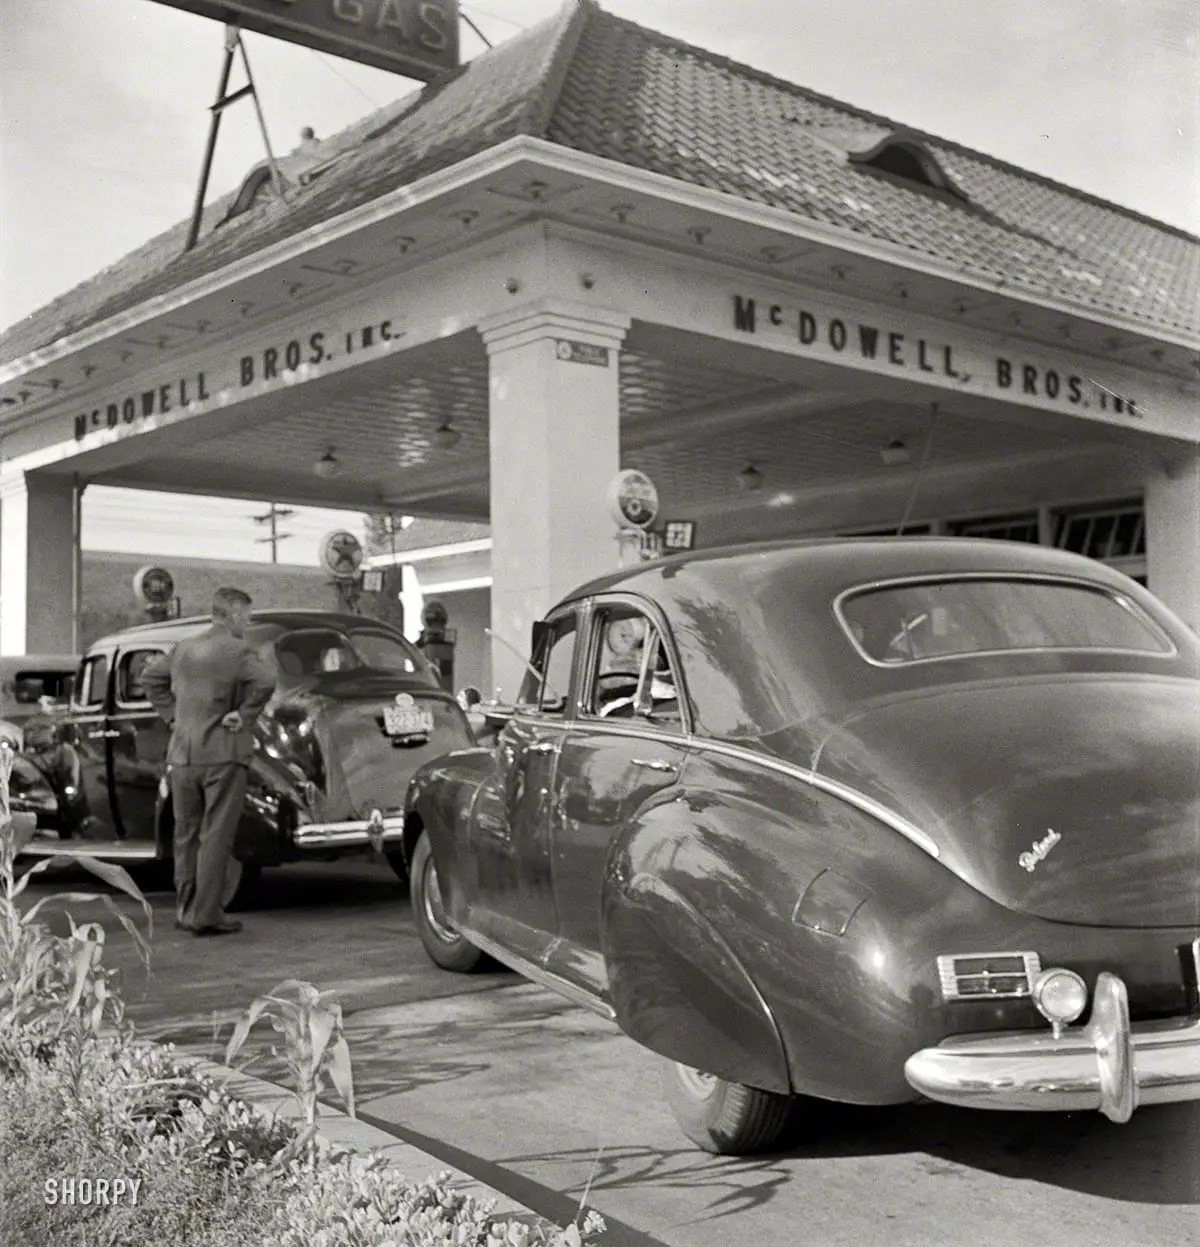 Washington, D.C. "At 7 a.m. on June 21, 1942, the day before stricter gas rationing was enforced, cars were pouring into this gas station on upper Wisconsin Avenue." If they still made cars that looked like this Packard, we'd run right out and buy one. Photo by Marjory Collins for the Office of War Information.